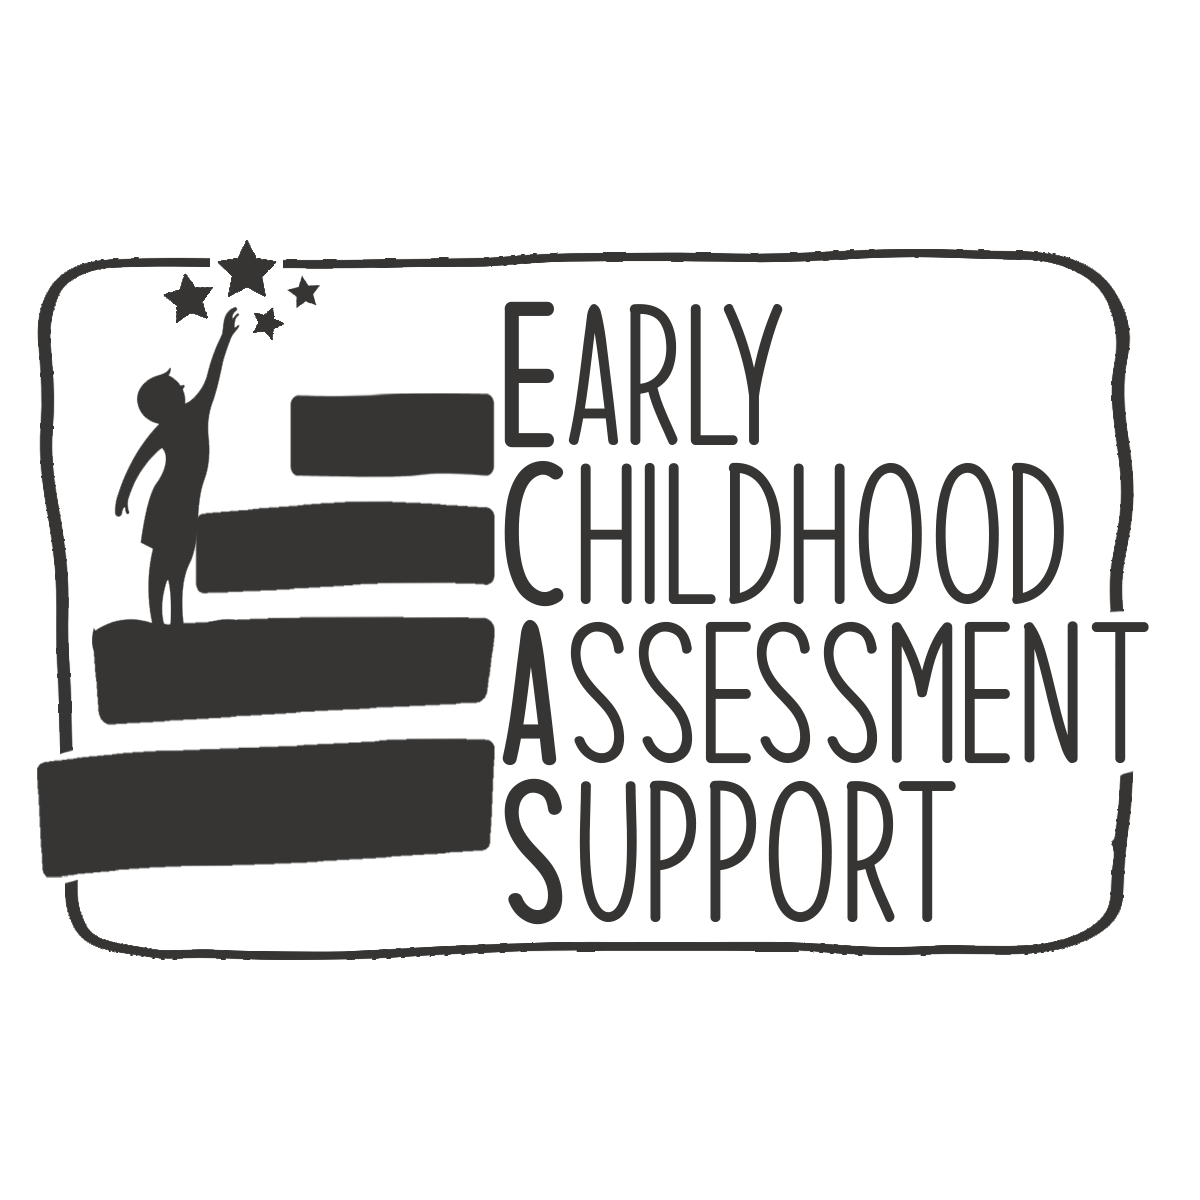 Early Childhood Assessment Support Home